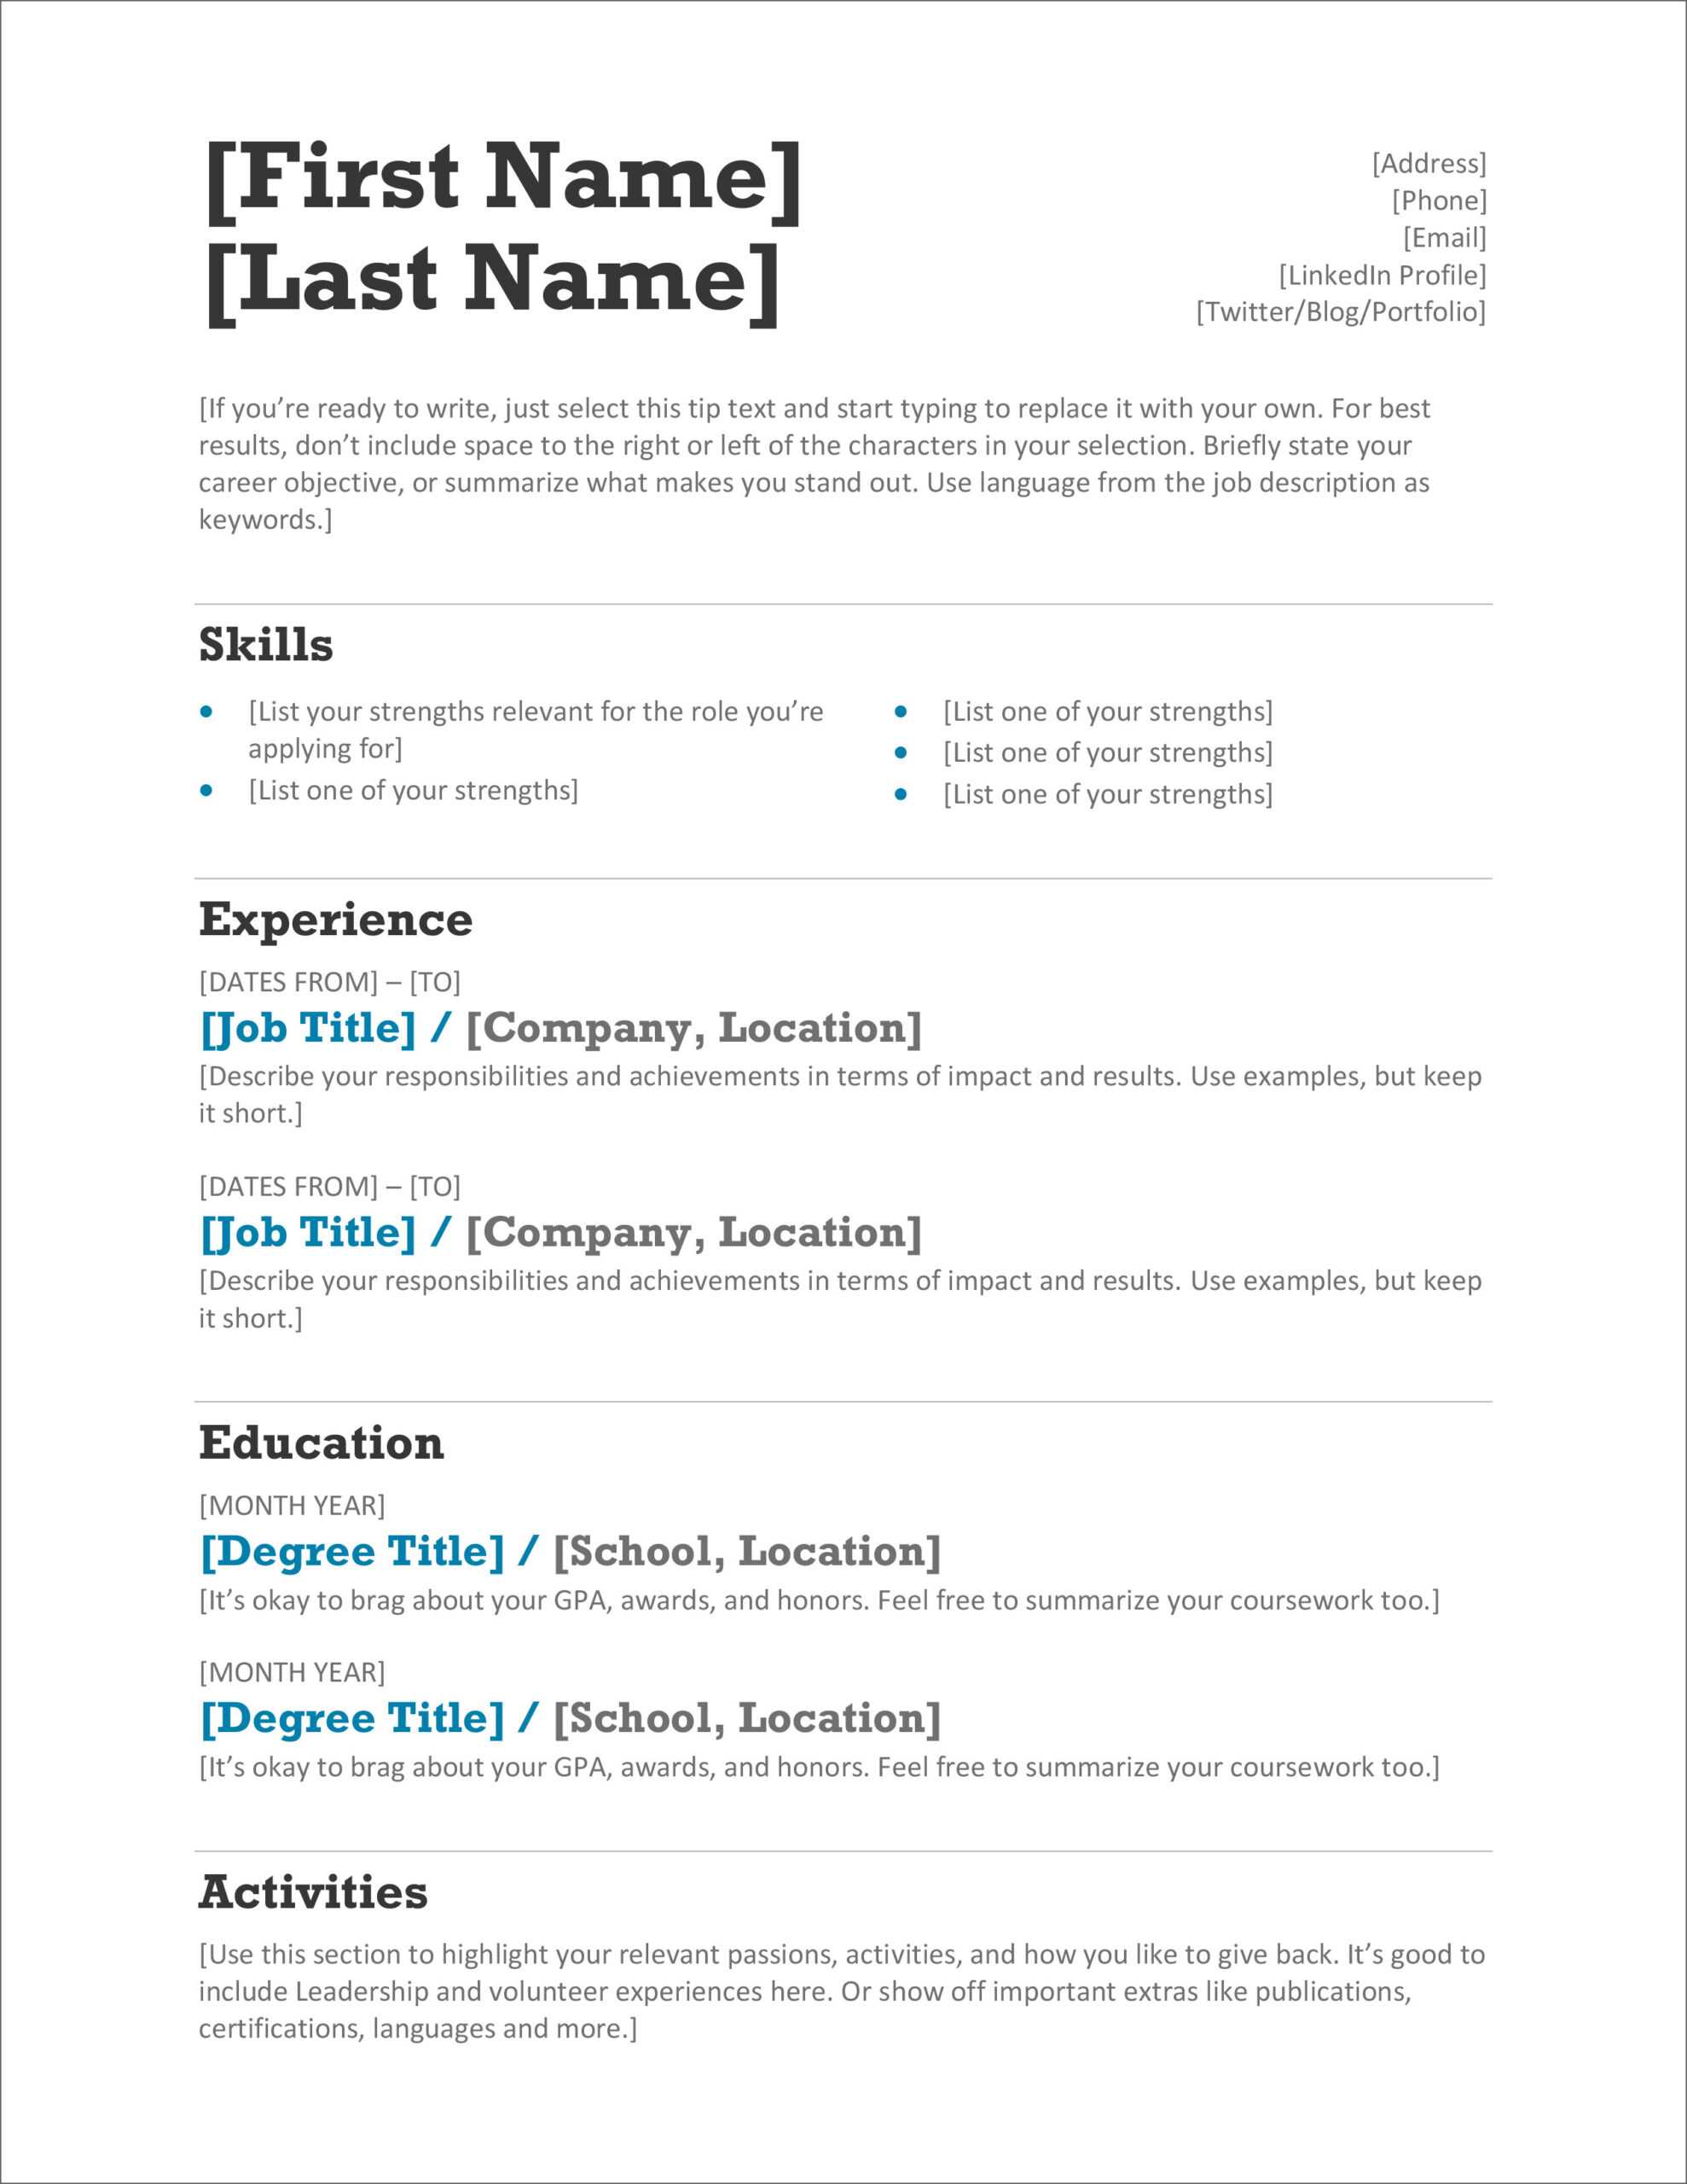 45 Free Modern Resume / Cv Templates – Minimalist, Simple In How To Make A Cv Template On Microsoft Word